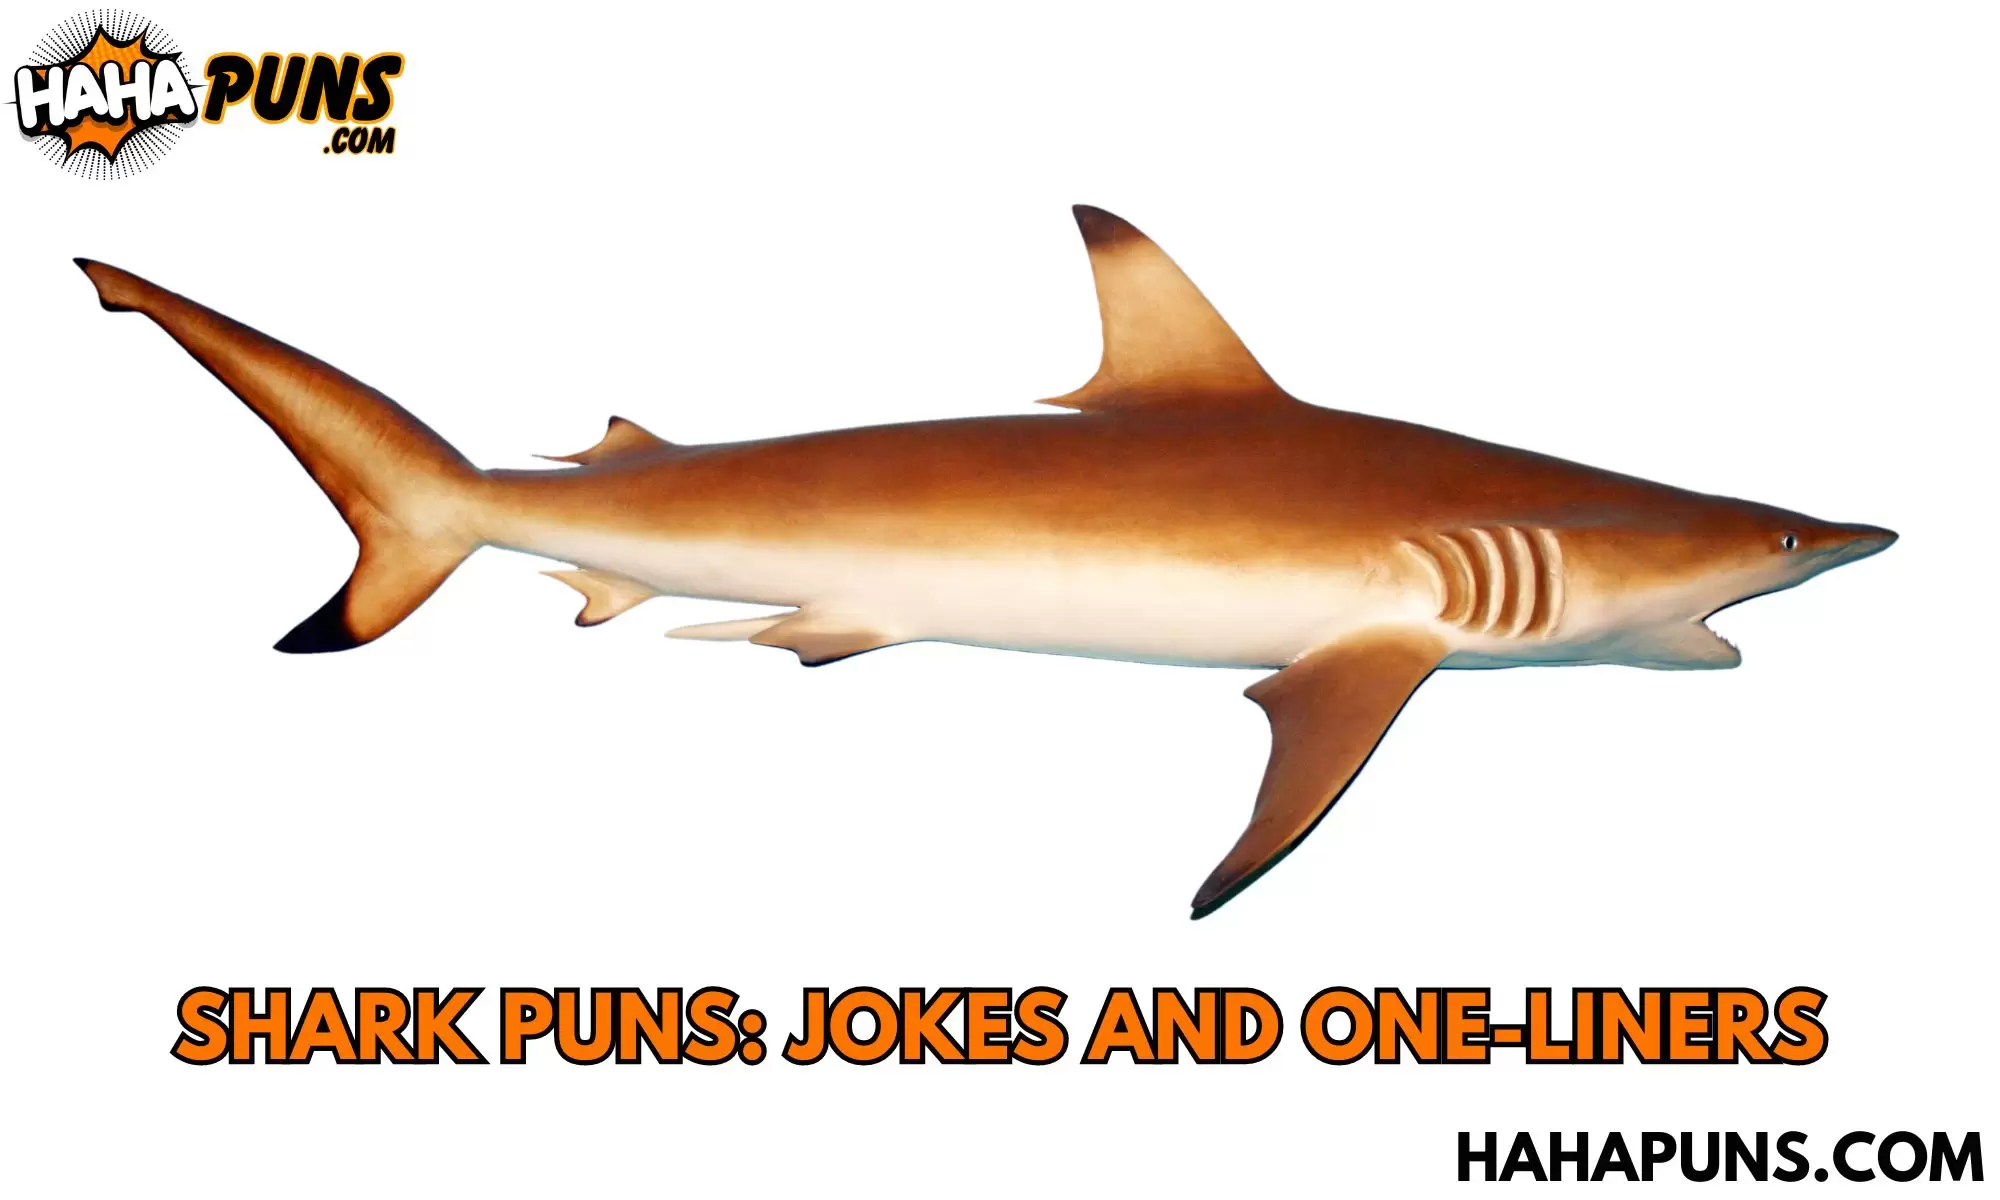 Shark Puns: Jokes And One-Liners